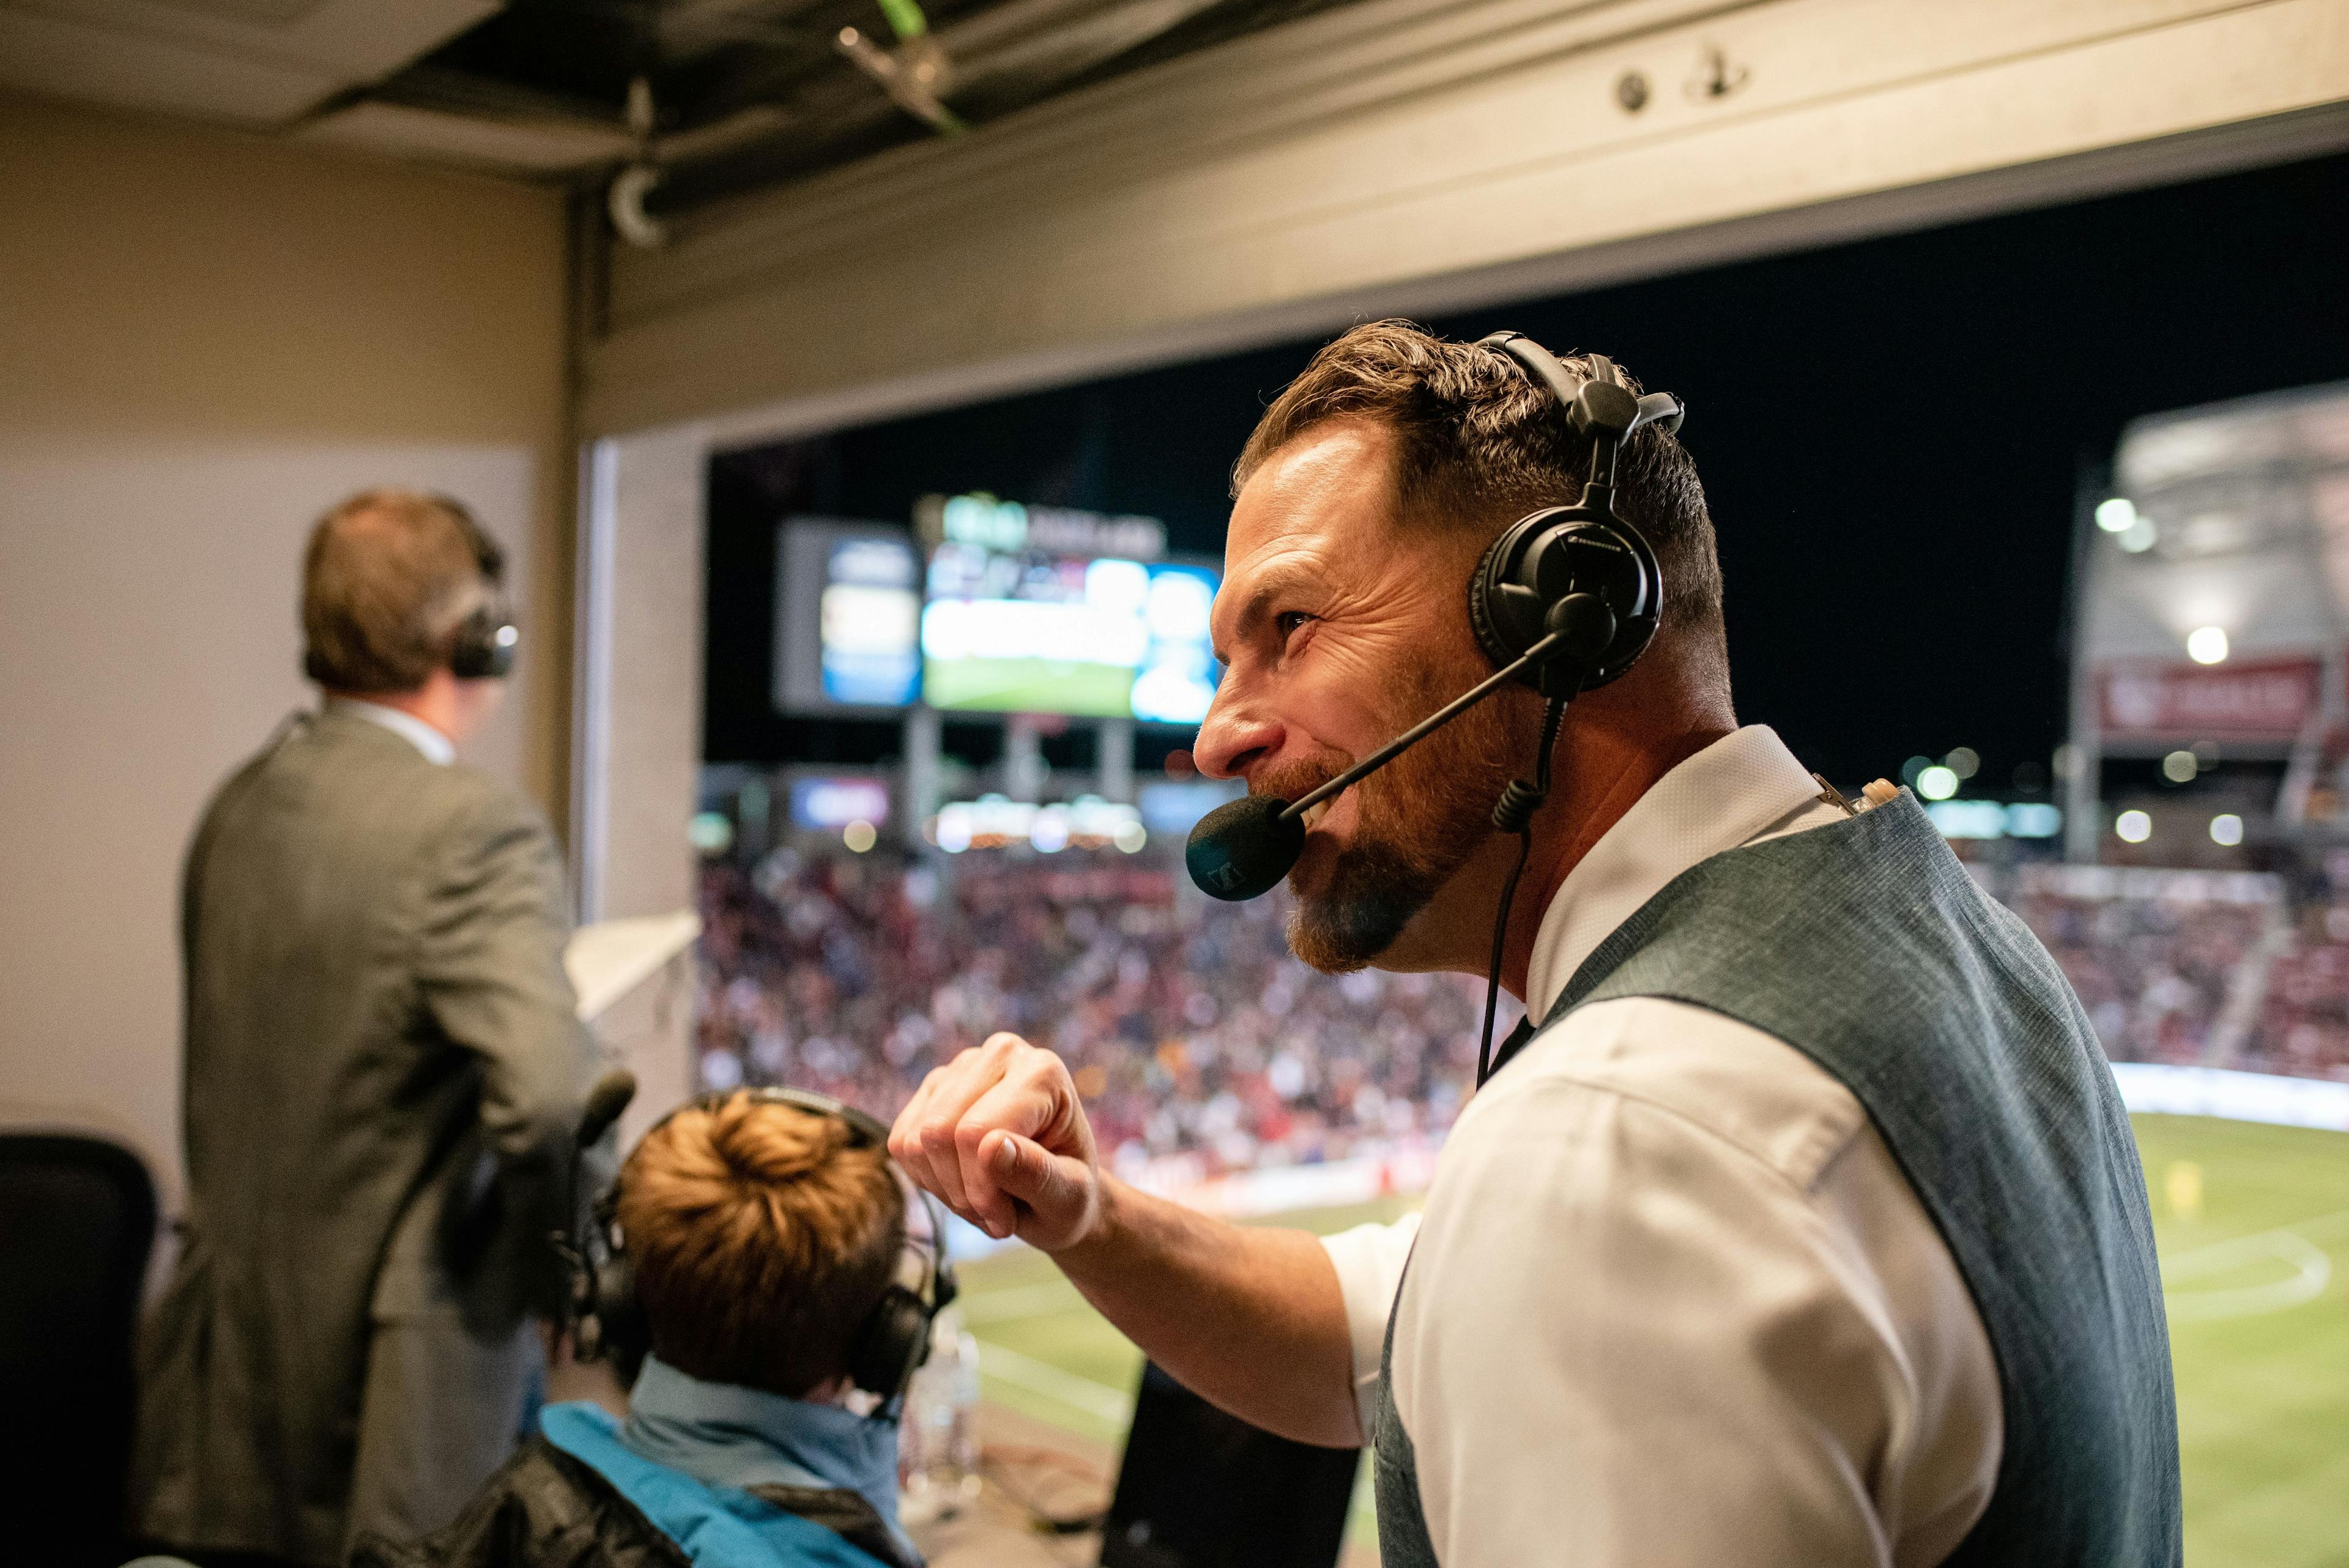 Brian Dunseth named among Apple TV MLS broadcasters